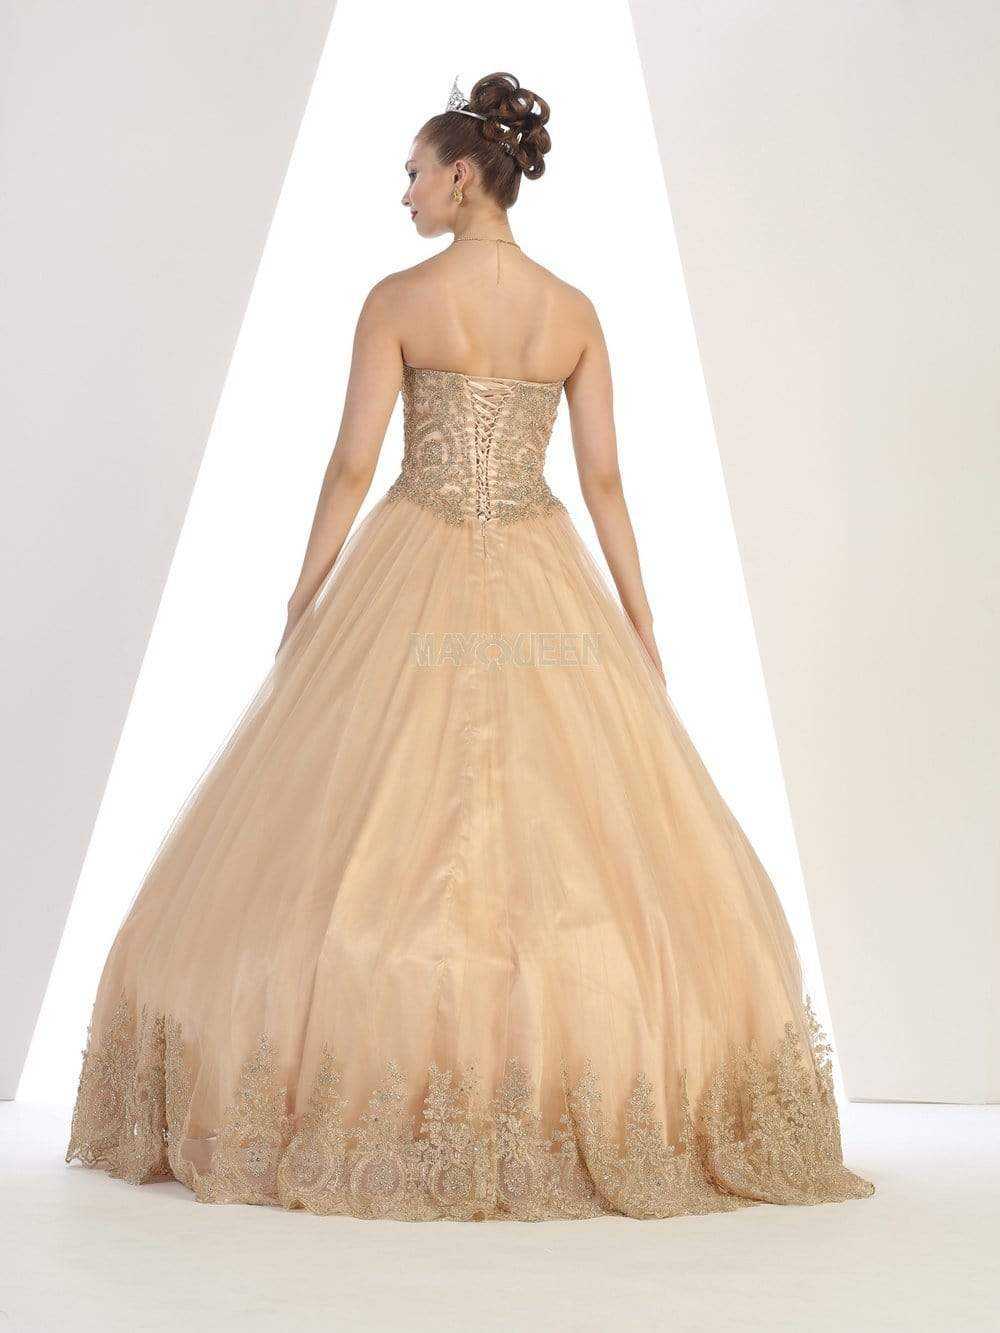 May Queen, May Queen - LK73 Strapless Sweetheart Gold Lace Embellished Ballgown